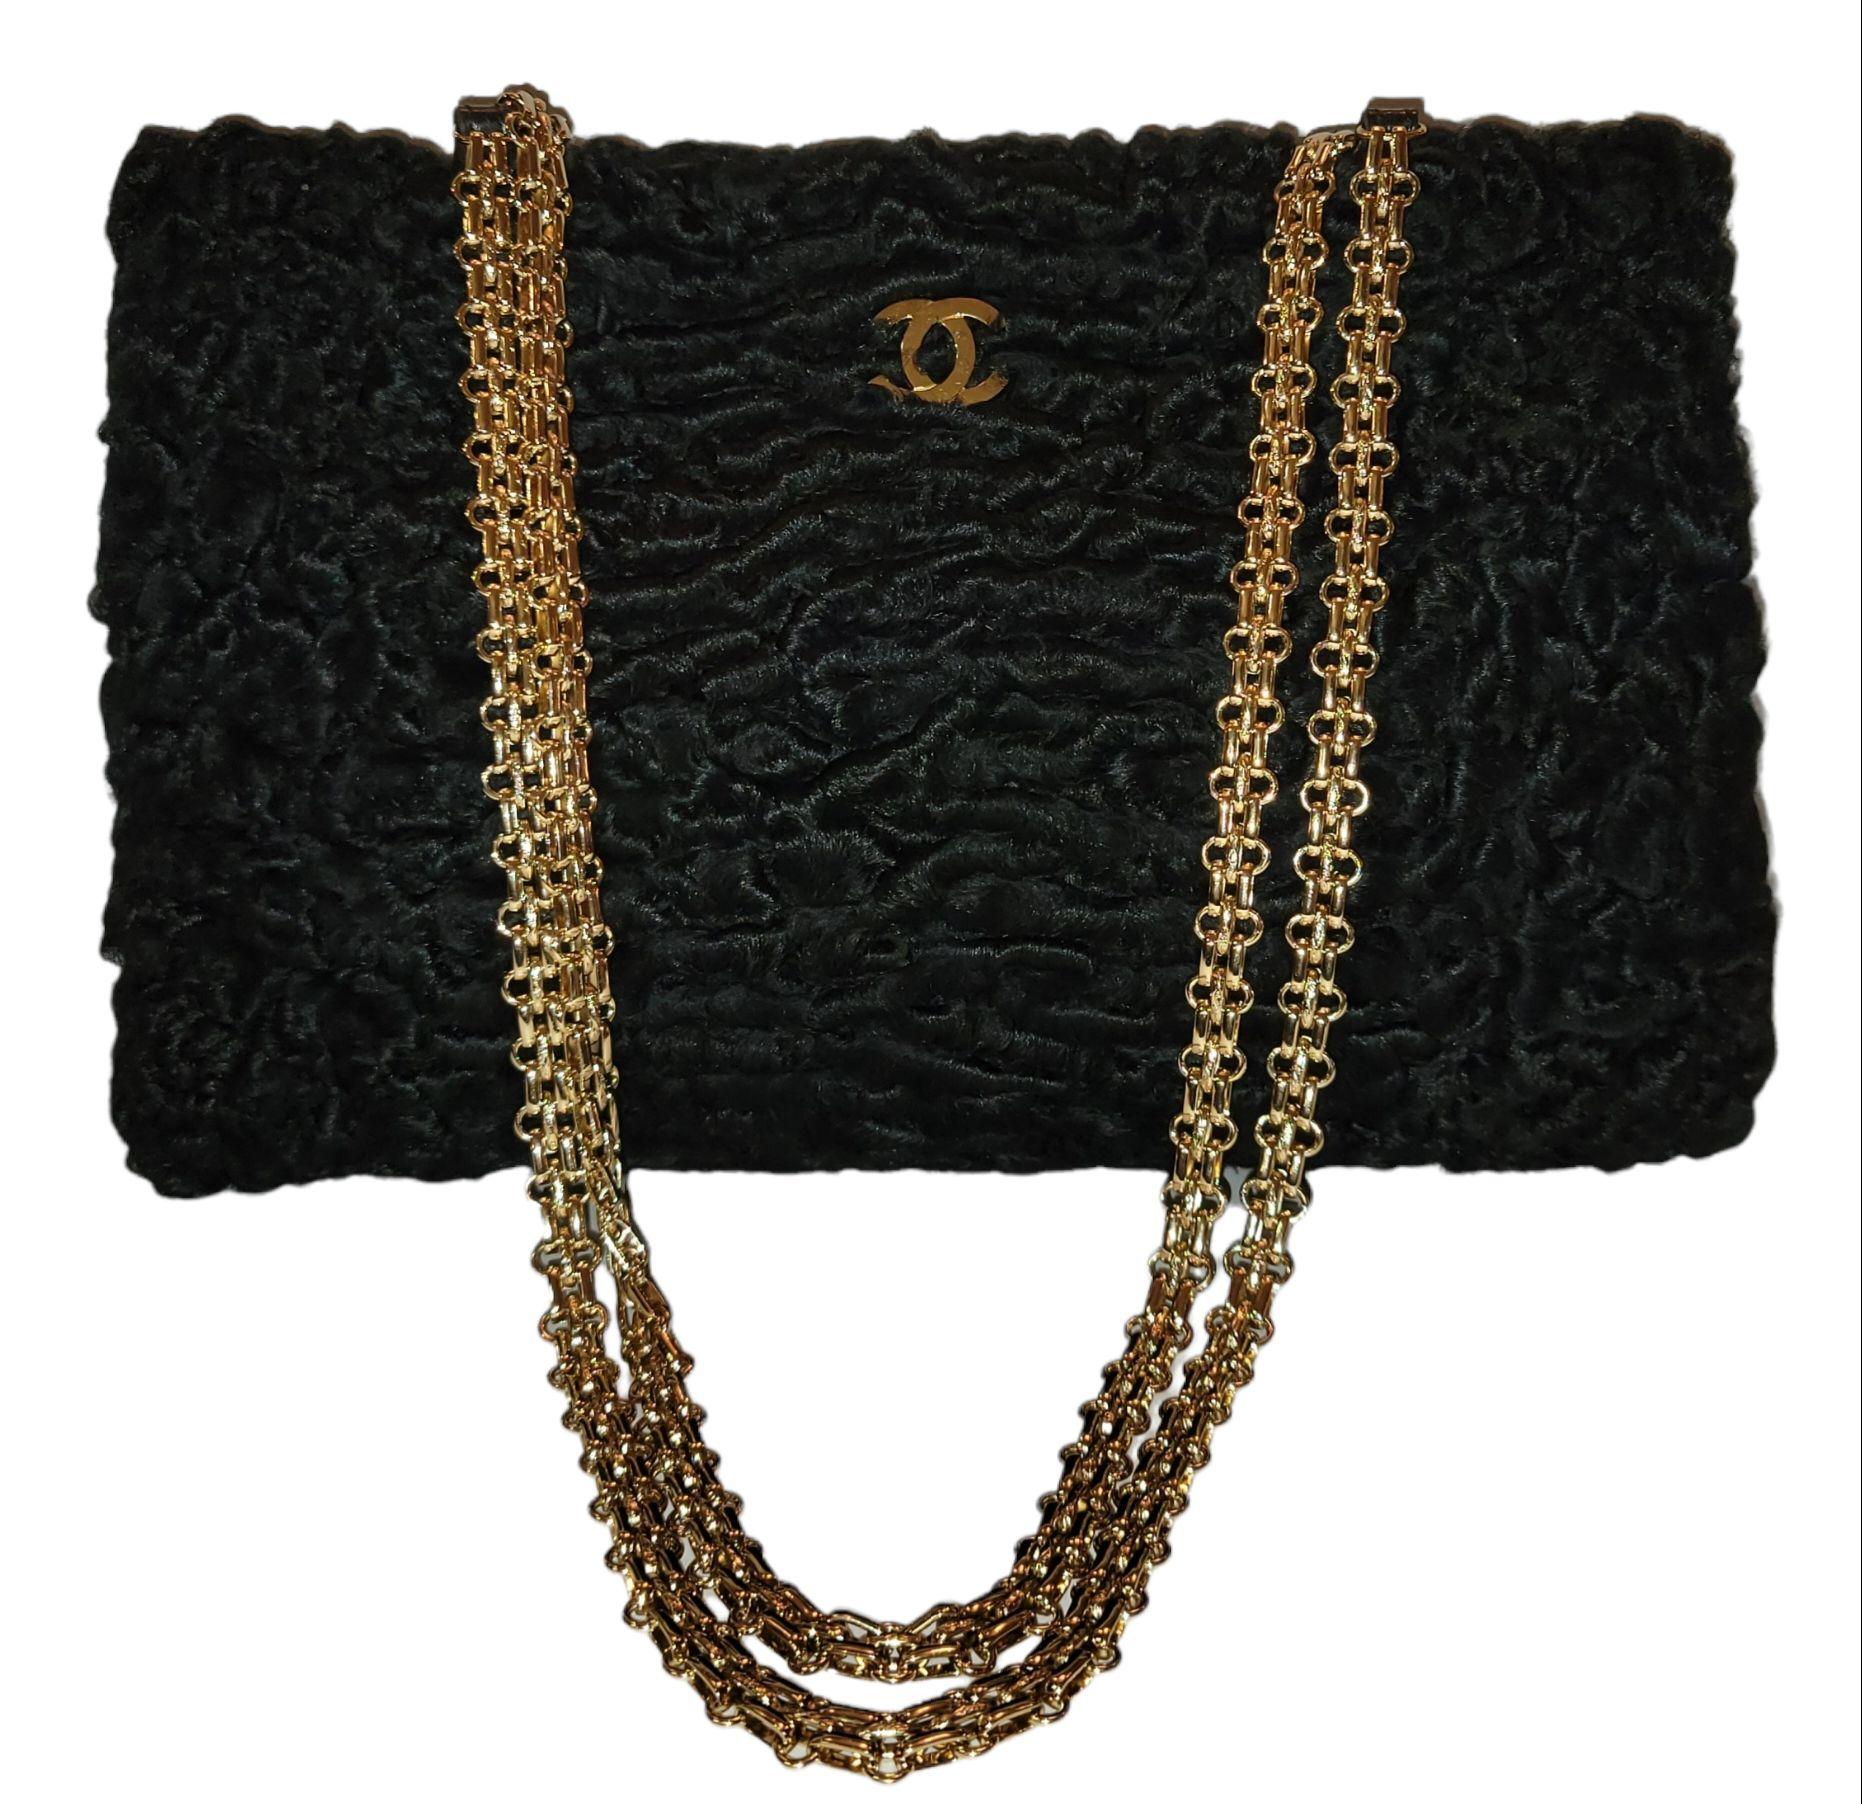 Authentic Rare Chanel Baby Persian Lamb Shoulder Bag Clutch Gold Hardware.

Soft all over baby Persian lamb fur flap bag. There is a gold hardware CC buckle in front of the bag. Leather and gold hardware chain. Soft black color leather on the